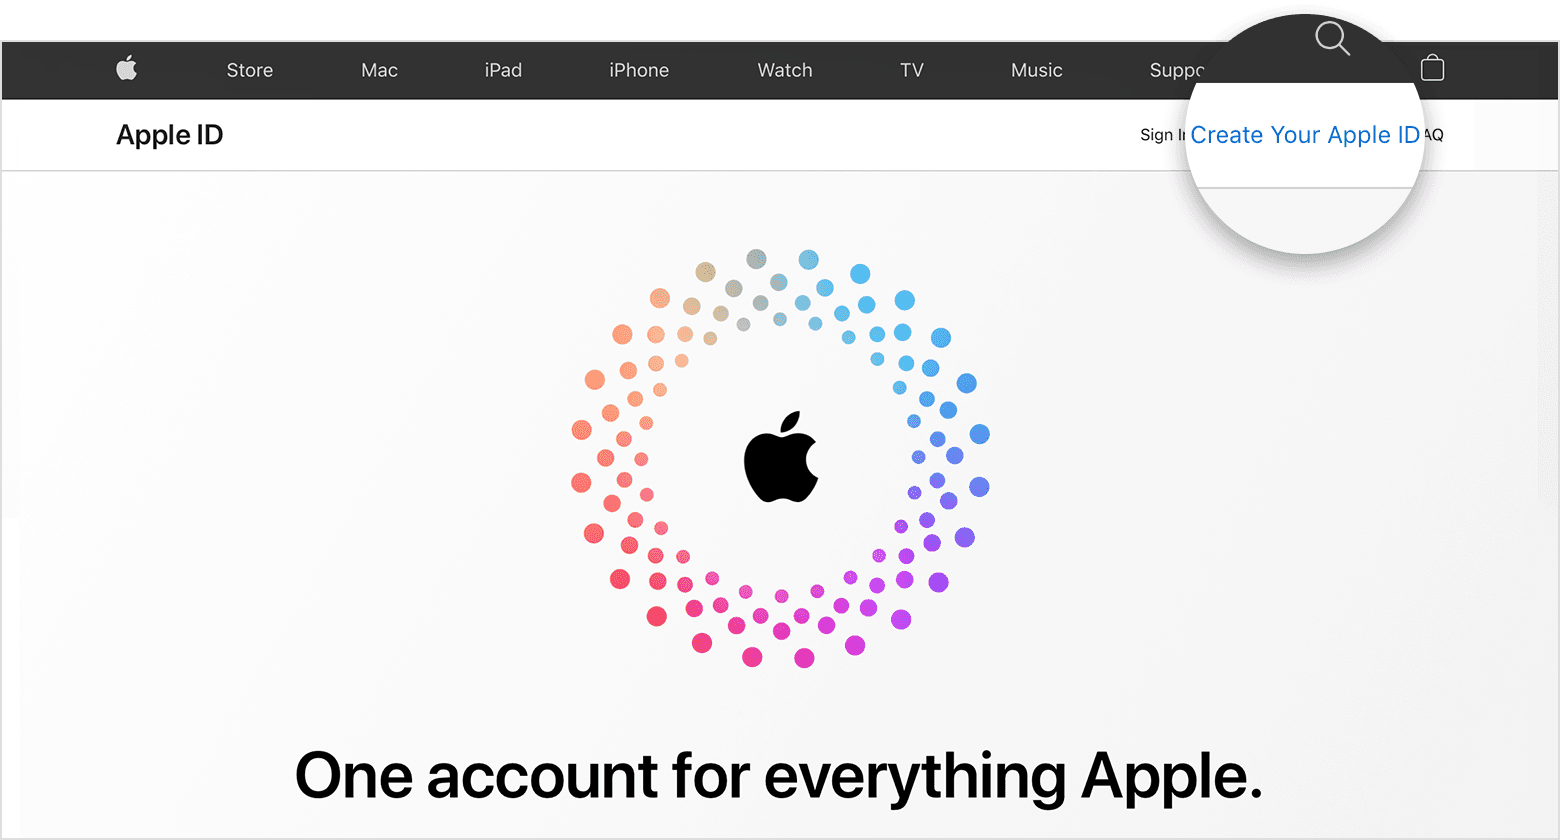 A screenshot of appleid.apple.com, which features an Apple logo in the center of the screen surrounded by concentric colored circles.